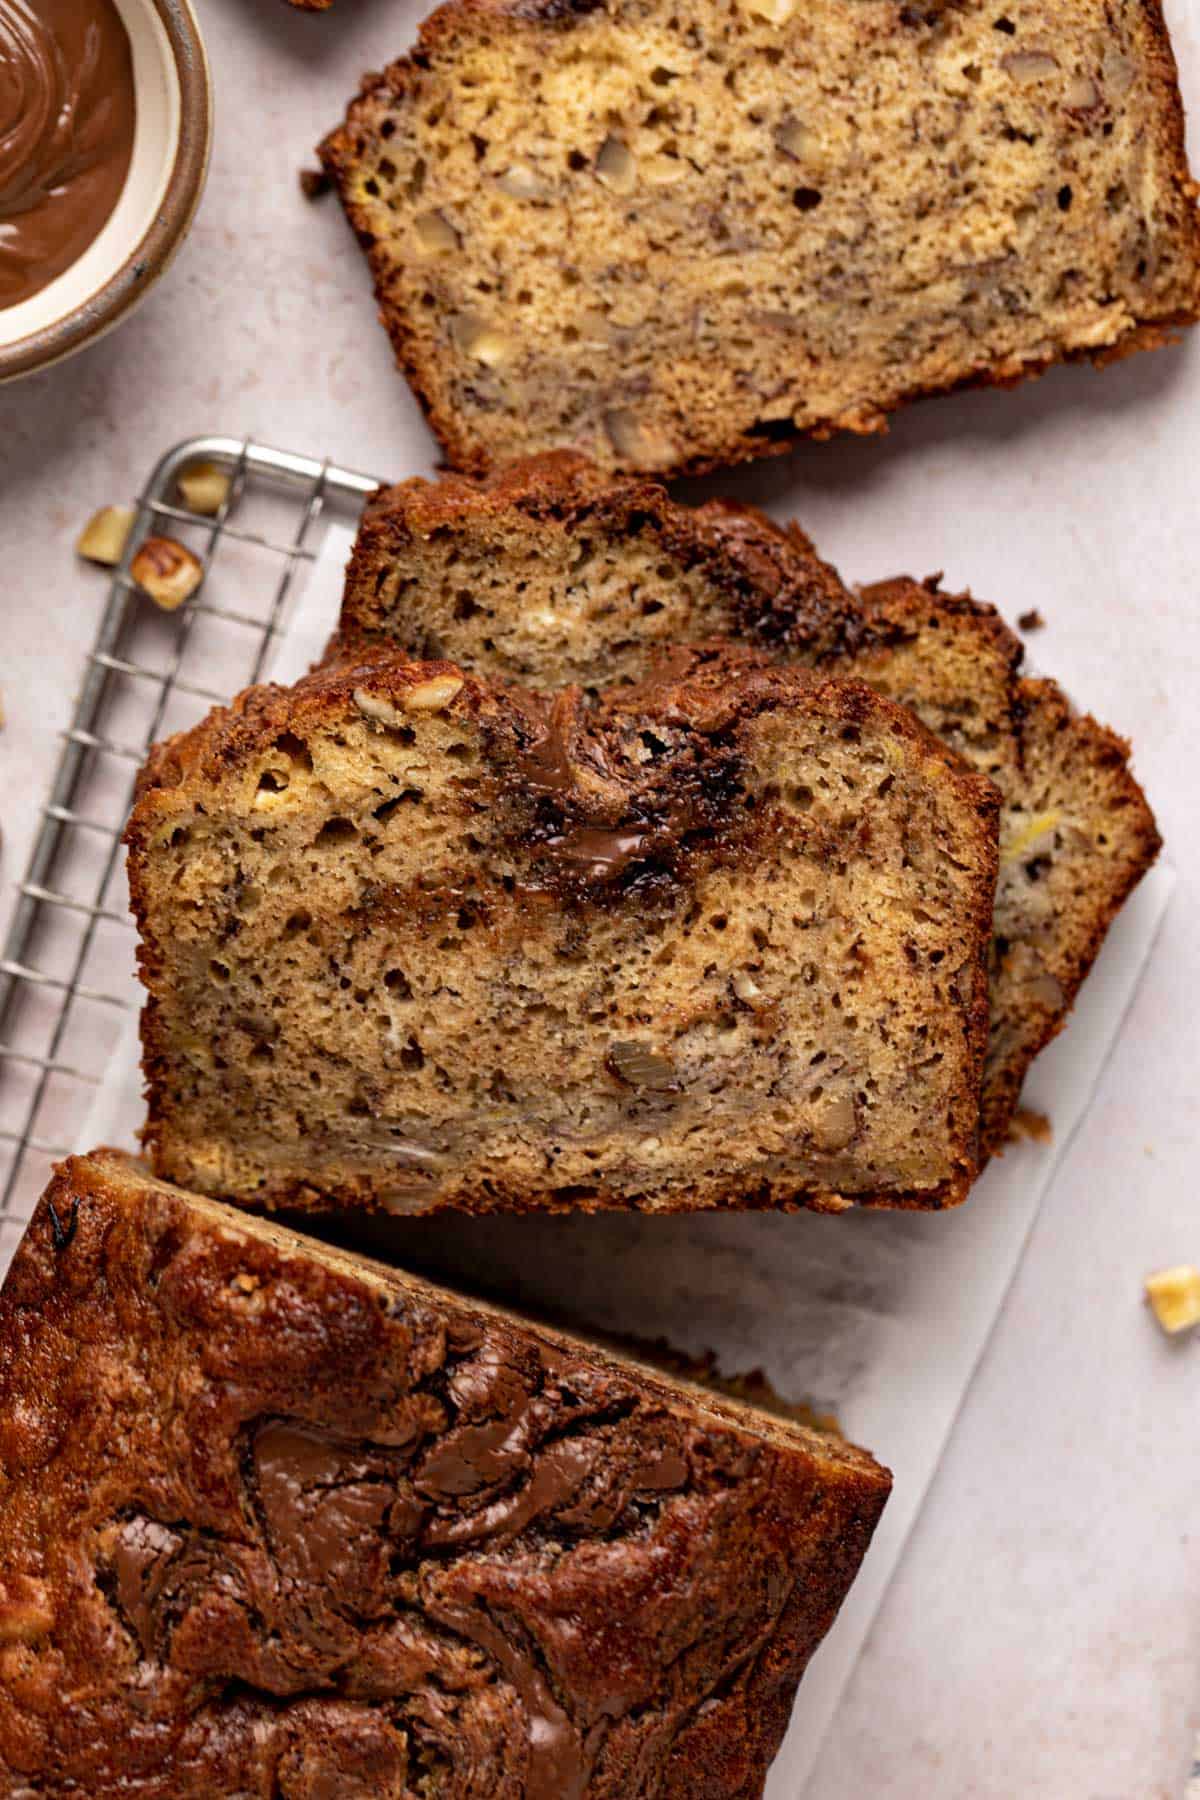 Overhead close up of slices of banana hazelnut bread on a rectangular metal cooling rack set on a flat surface.